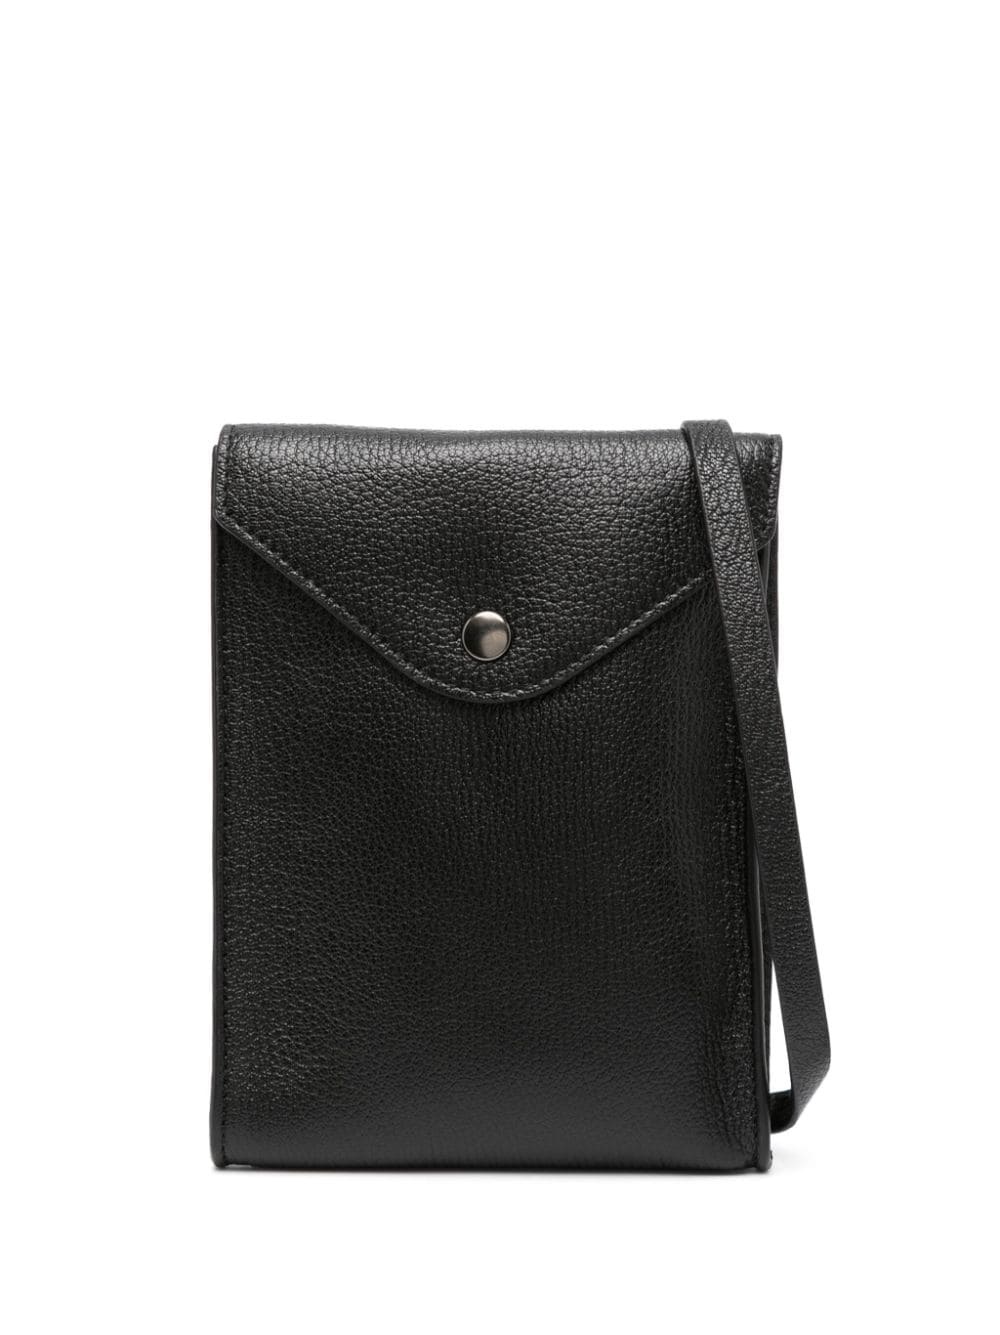 grained-texture leather crossbody bag - 1